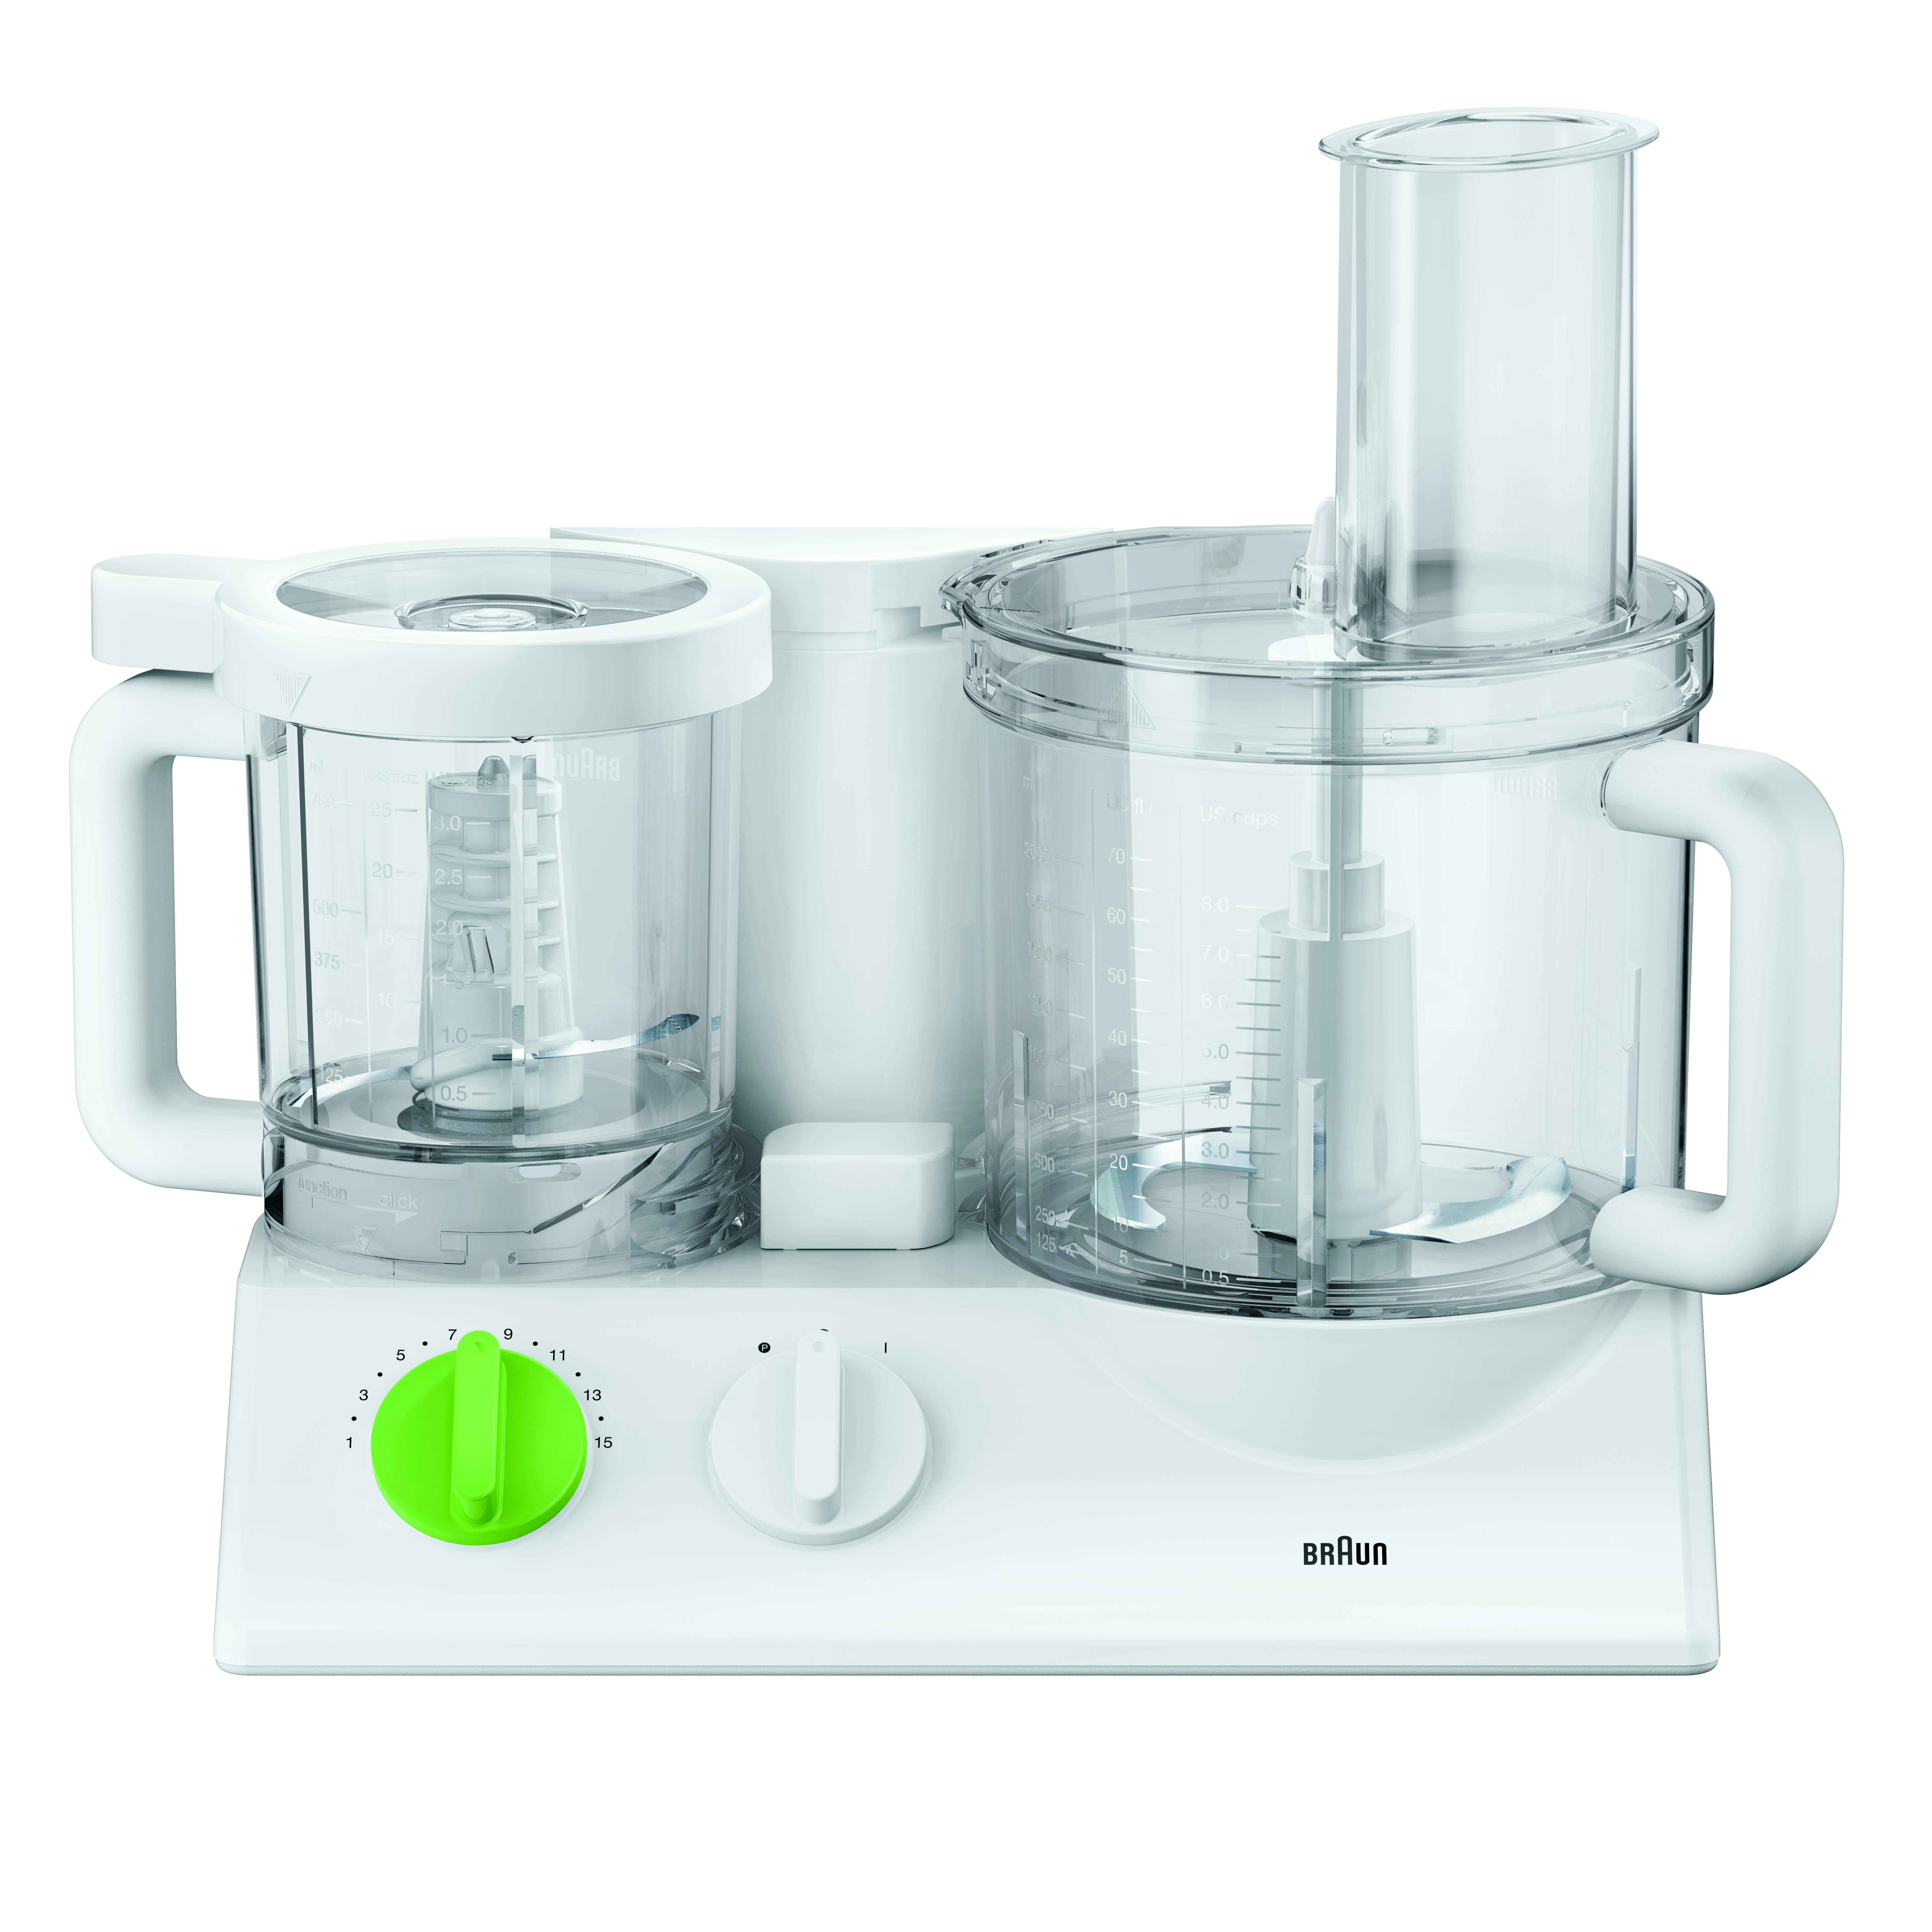 Braun Tribute Collection Food Processor, White, Stainless Steel Material, FX3030